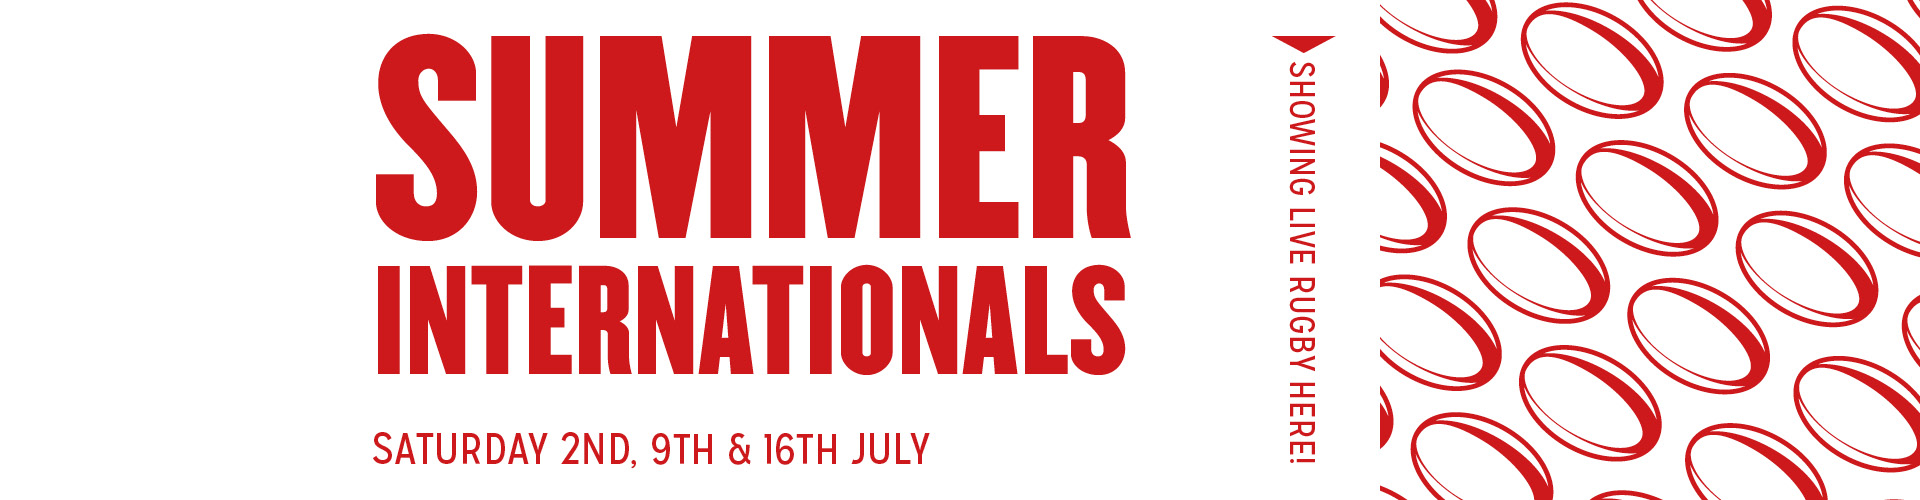 Summer Internationals. Saturday 2nd, 9th and 16th July. Showing Live Rugby Here!